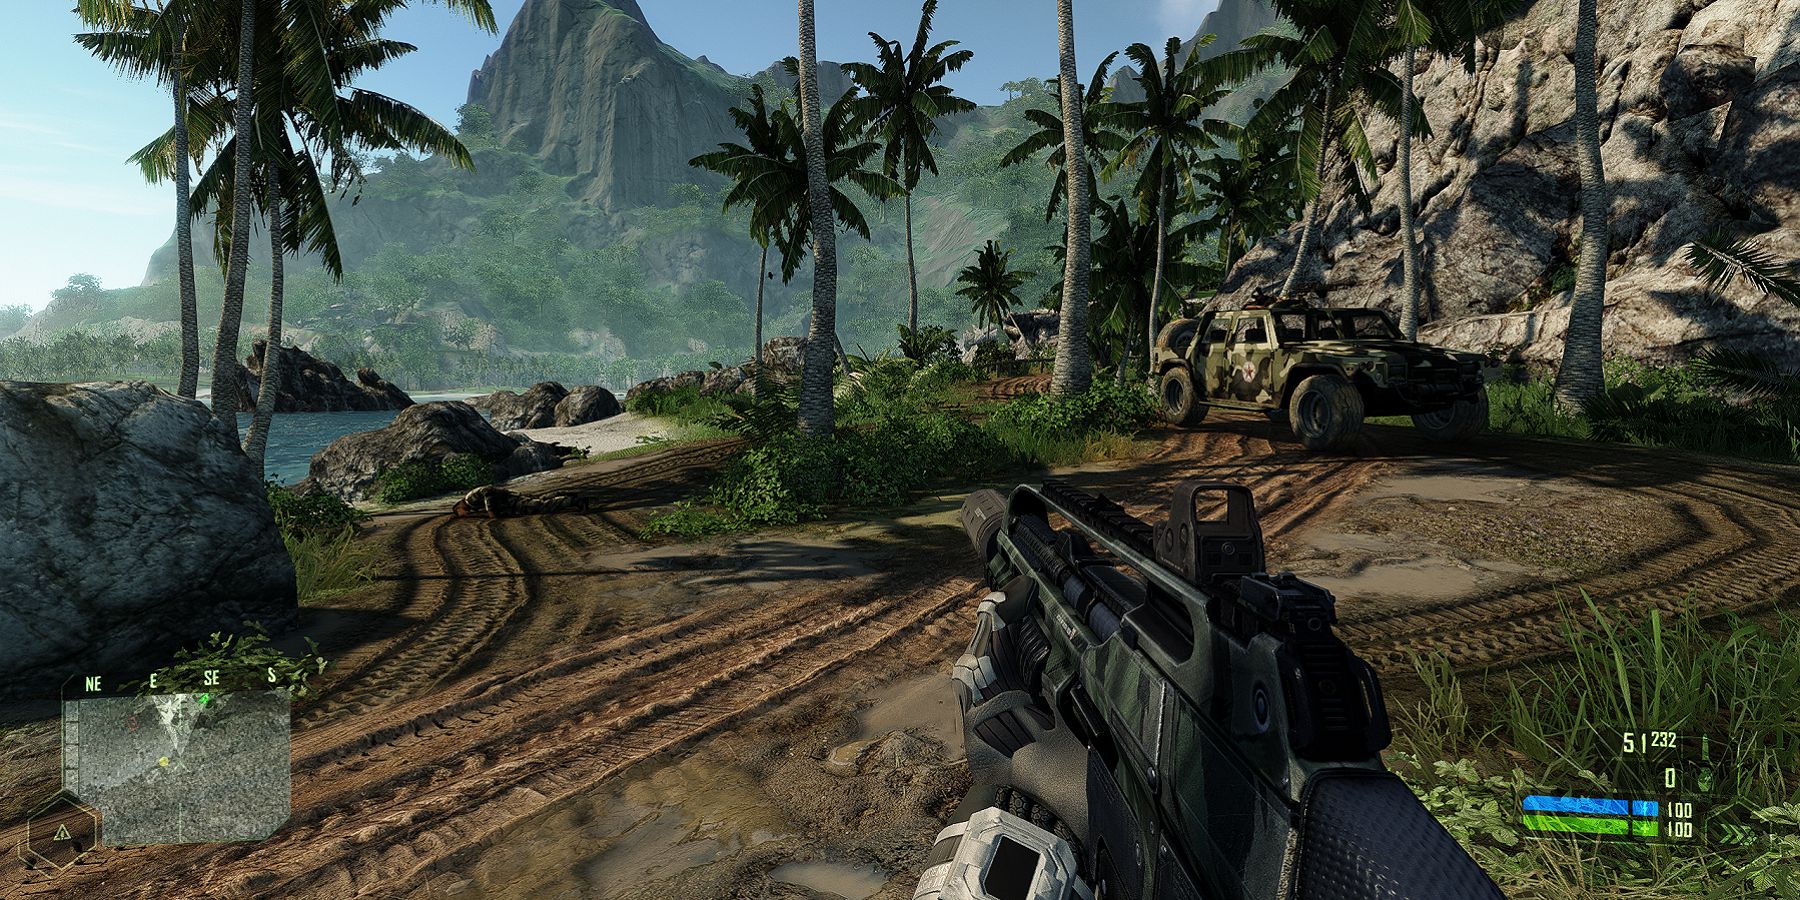 A screenshot from Crysis showing a dirt road and a mountain in the far distance.